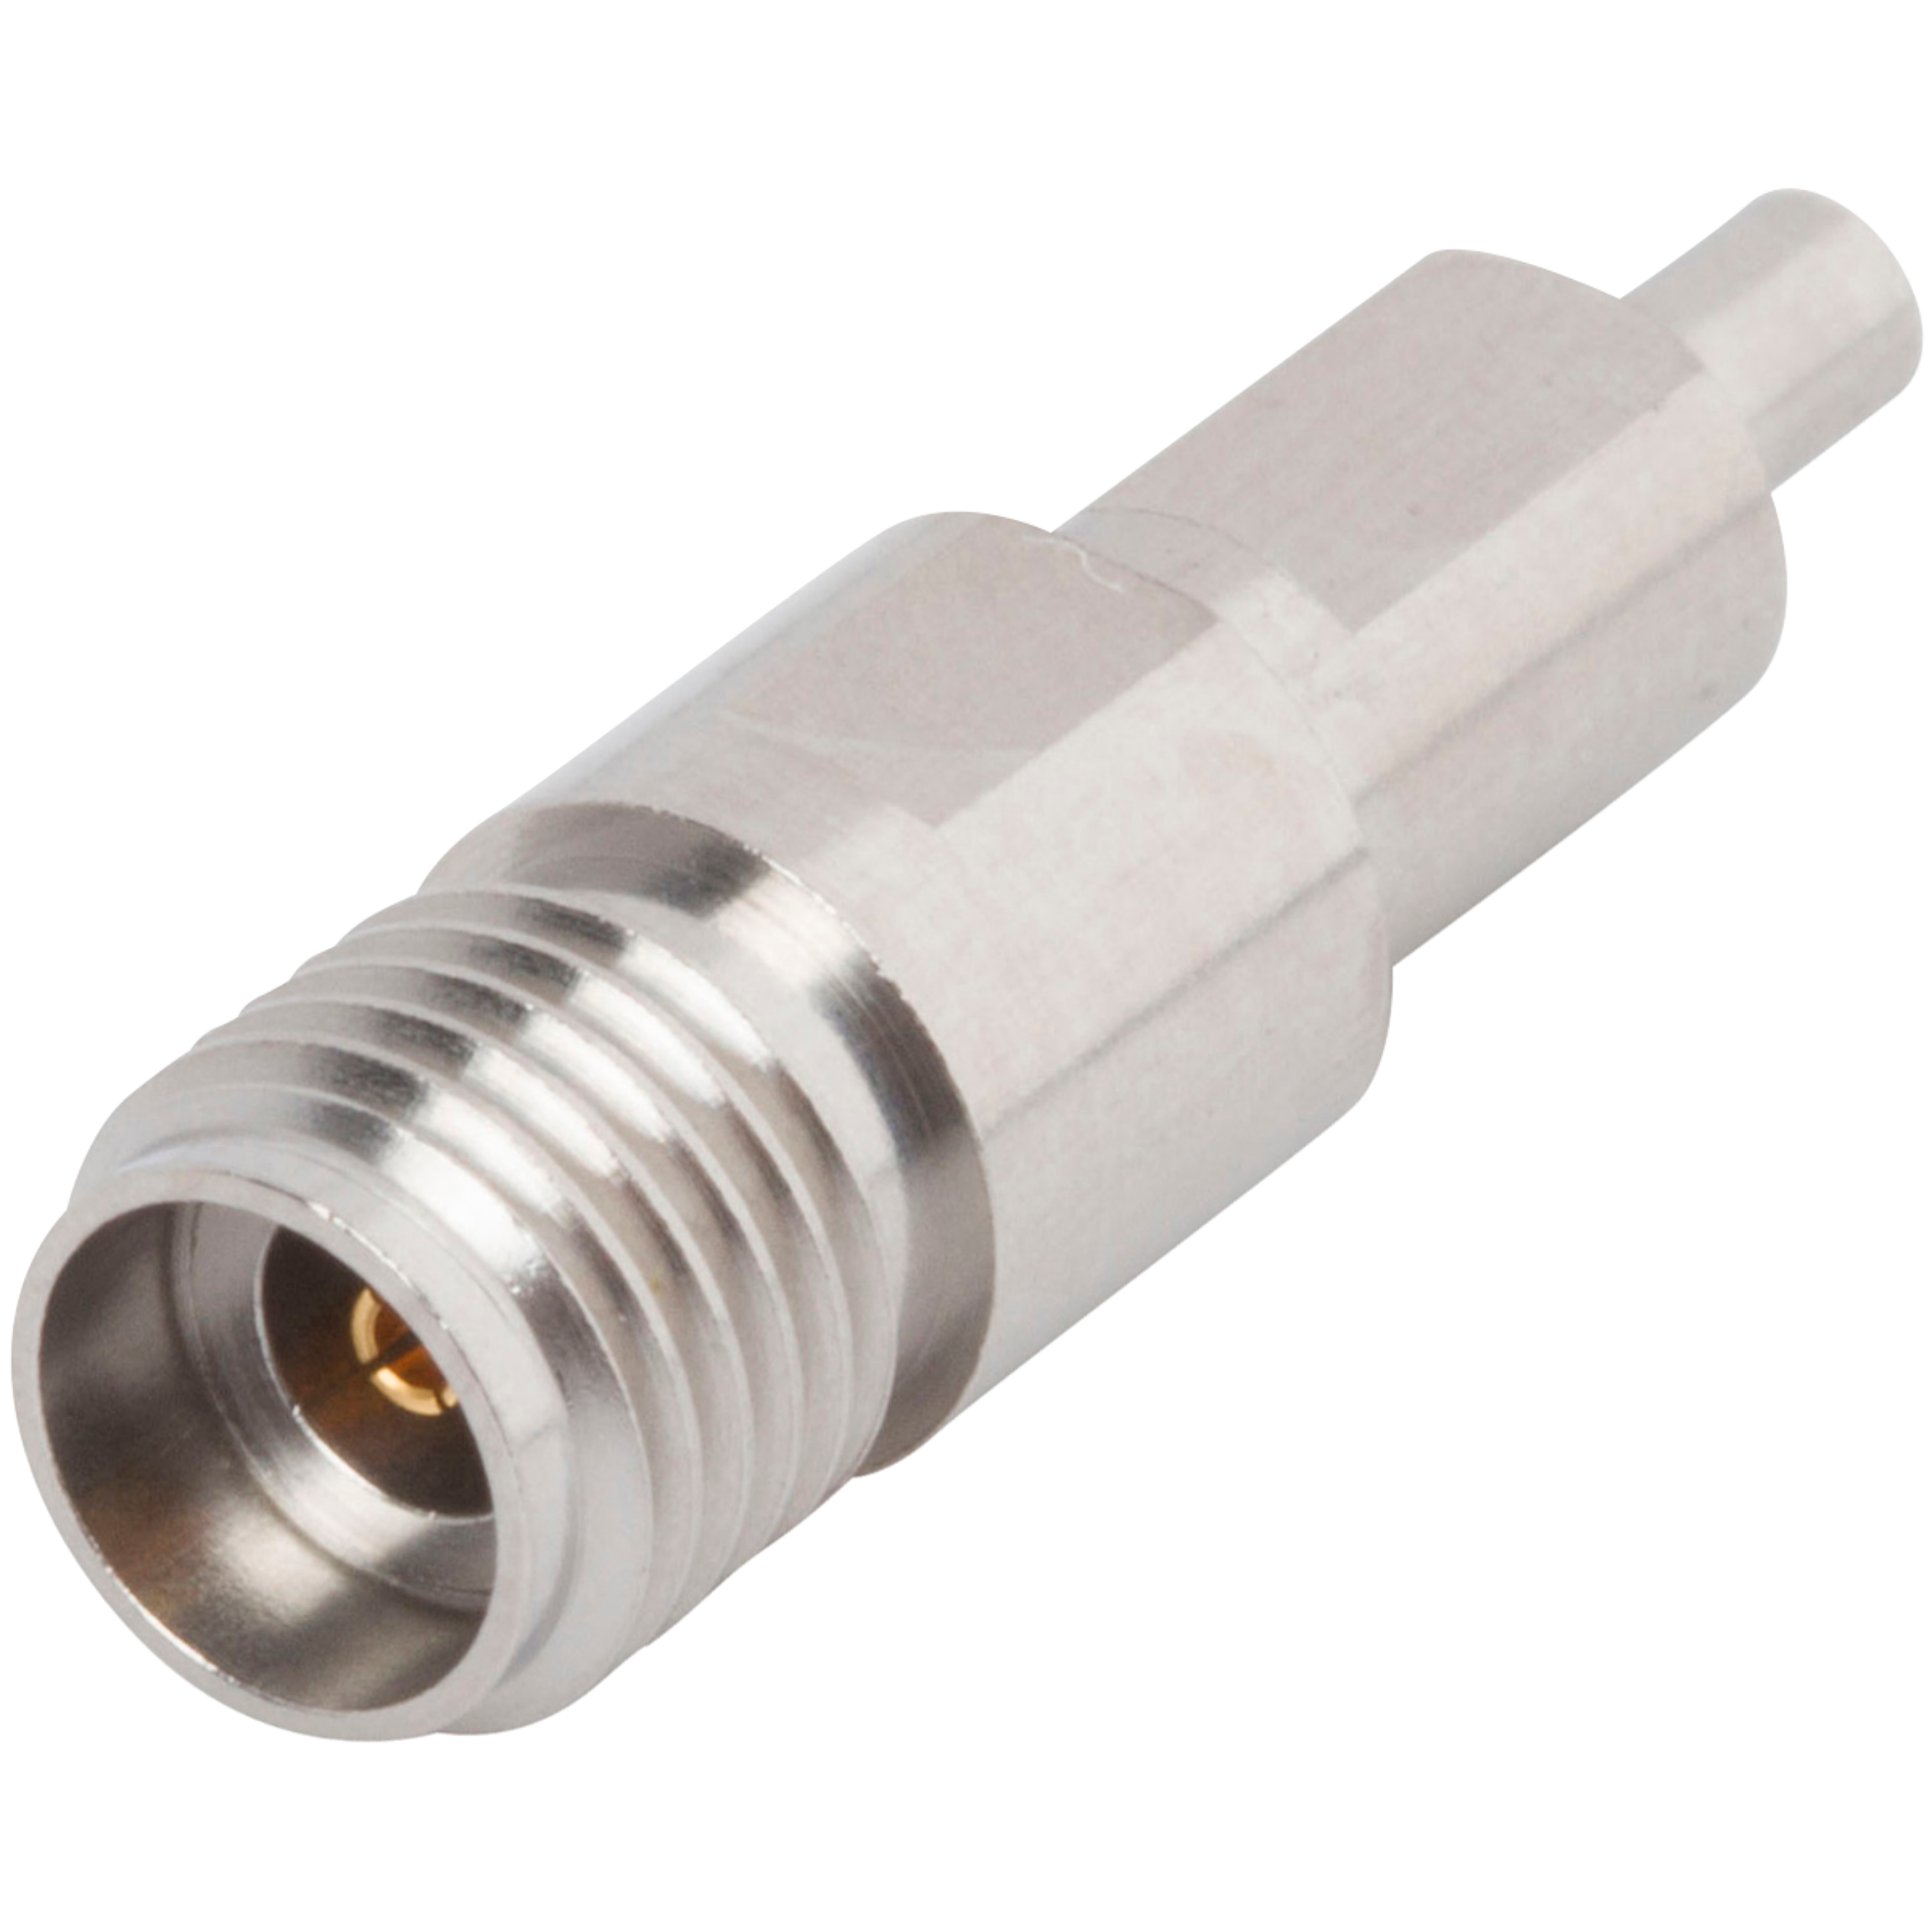 Picture of SMPS Male  to 2.92mm Female Adapter, FD